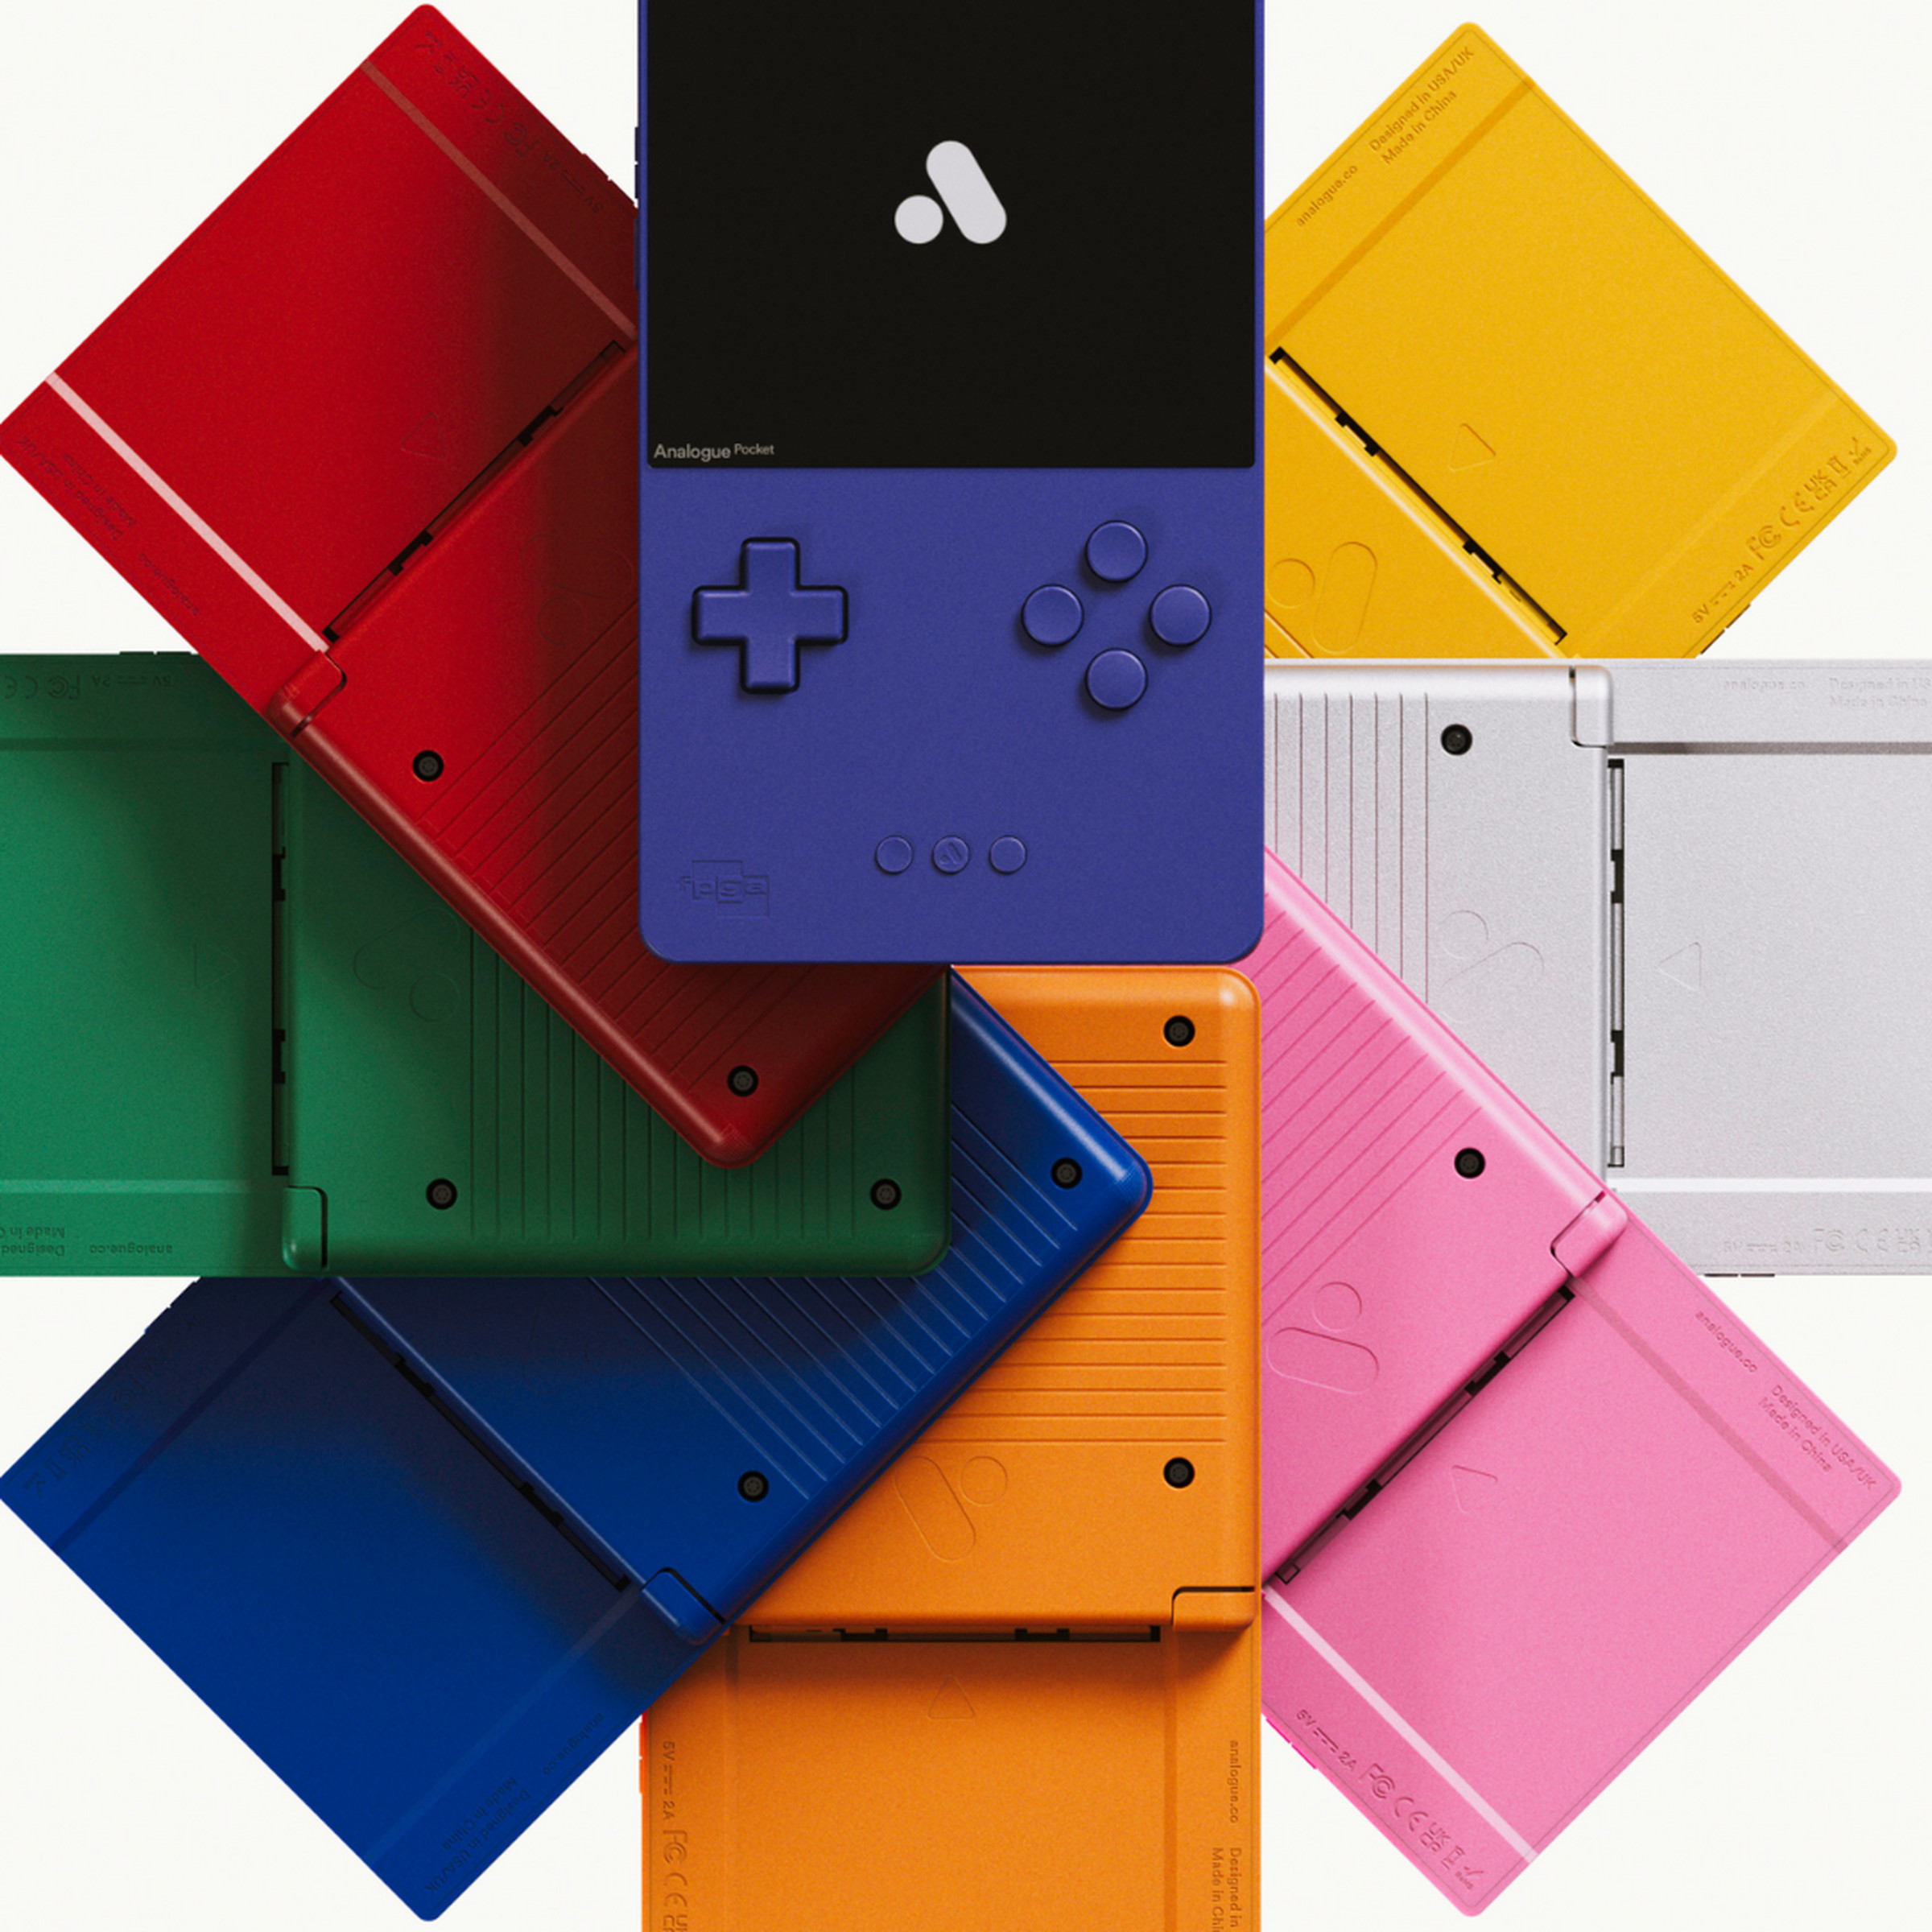 Product image of the Analogue Pocket Classic Limited Edition featuring a circular display of eight Analogue Pocket handheld consoles in colors clockwise from the top: indigo, yellow, silver, pink, spice orange, blue, green, and red.